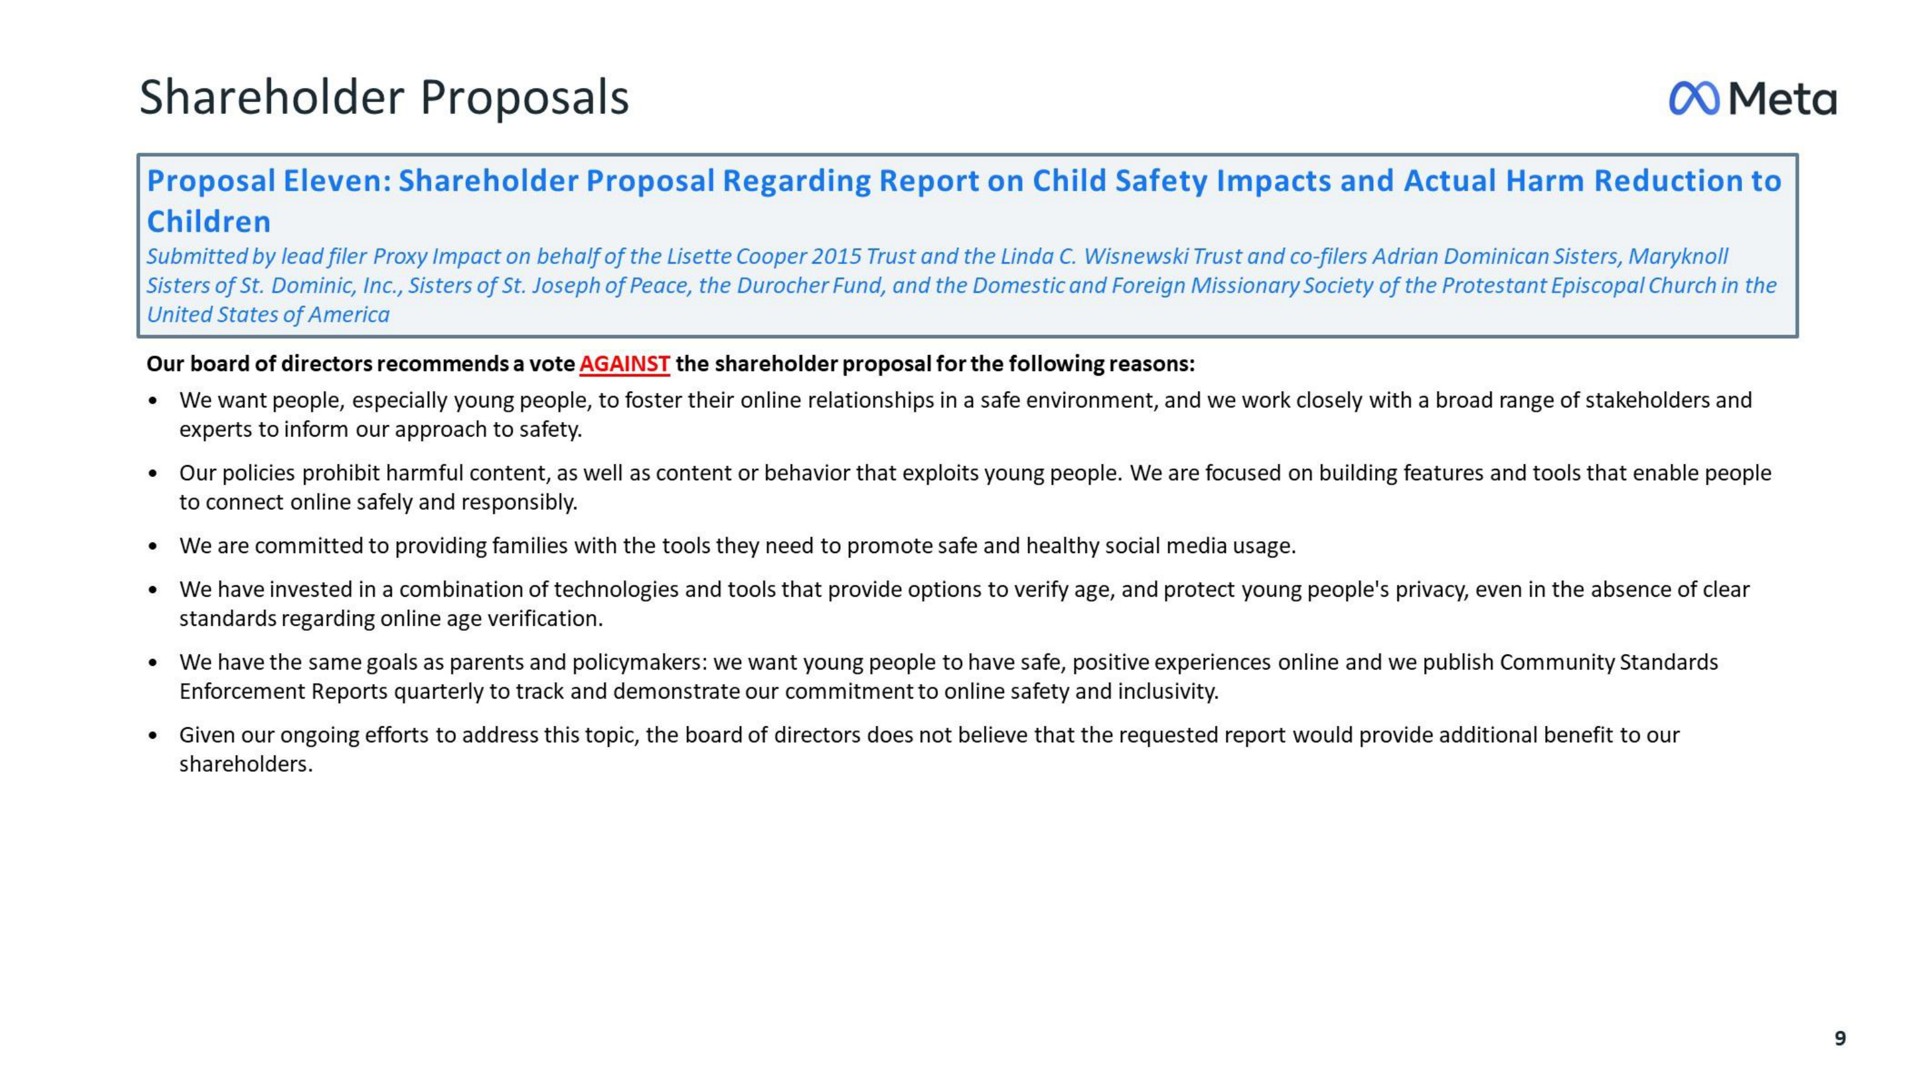 shareholder proposals meta proposal eleven shareholder proposal regarding report on child safety impacts and actual harm reduction to children | Meta